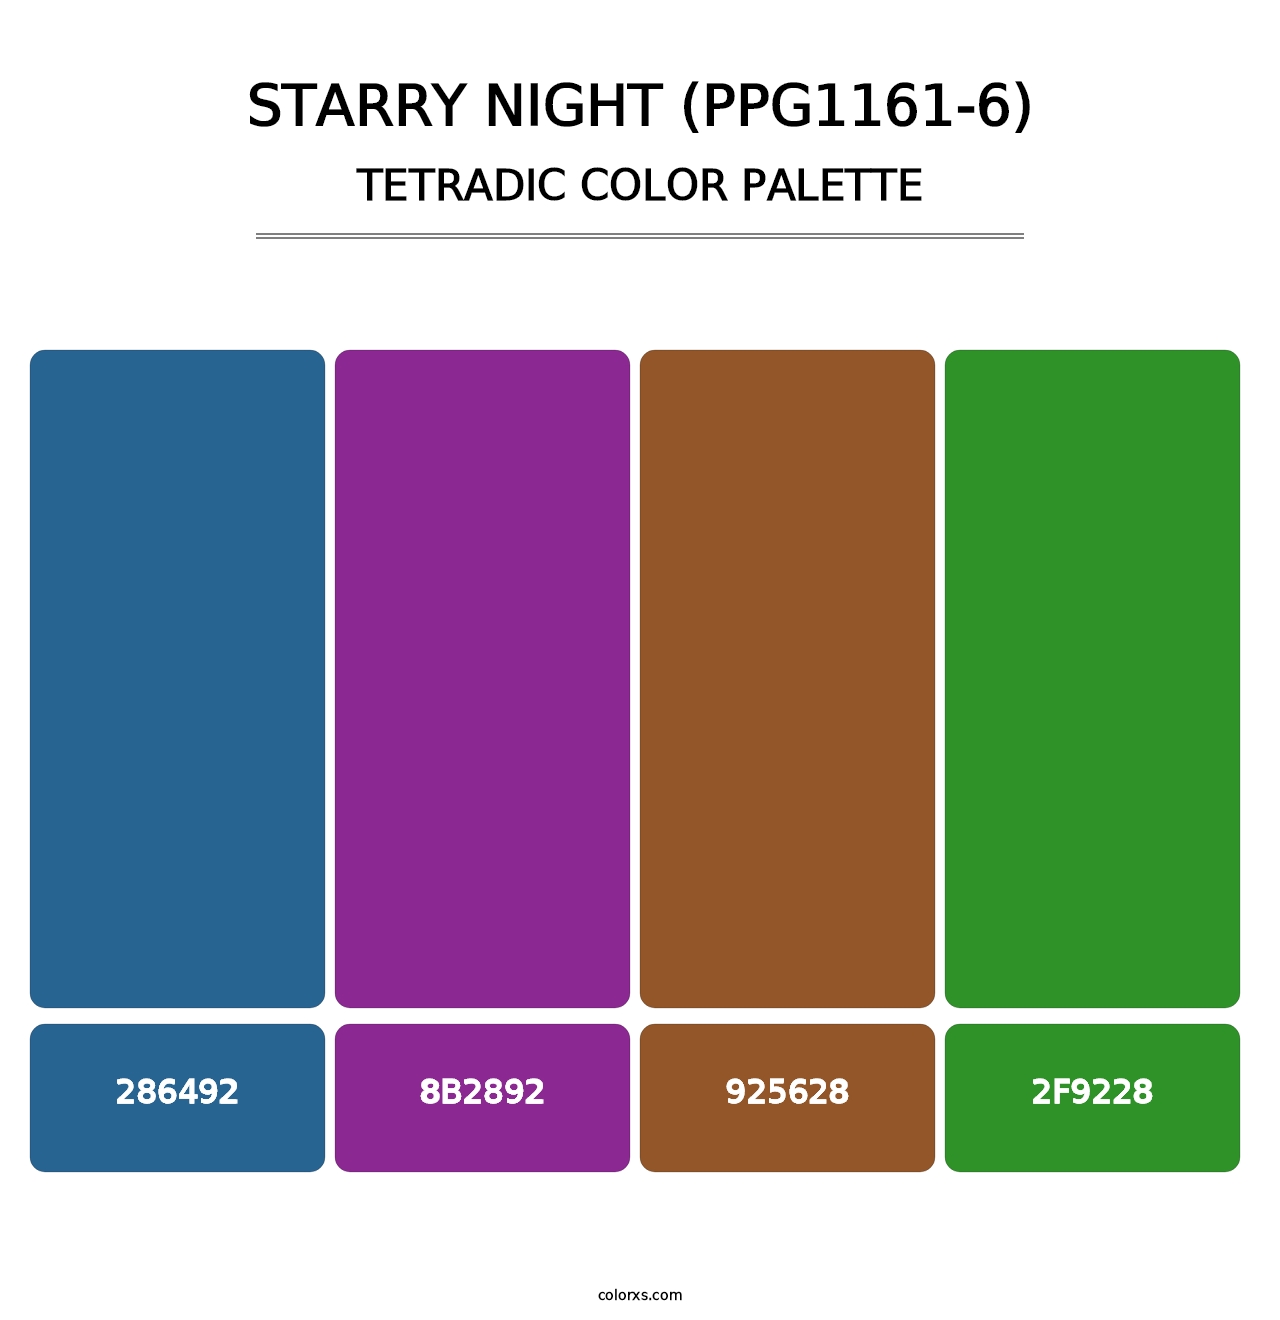 Starry Night (PPG1161-6) - Tetradic Color Palette